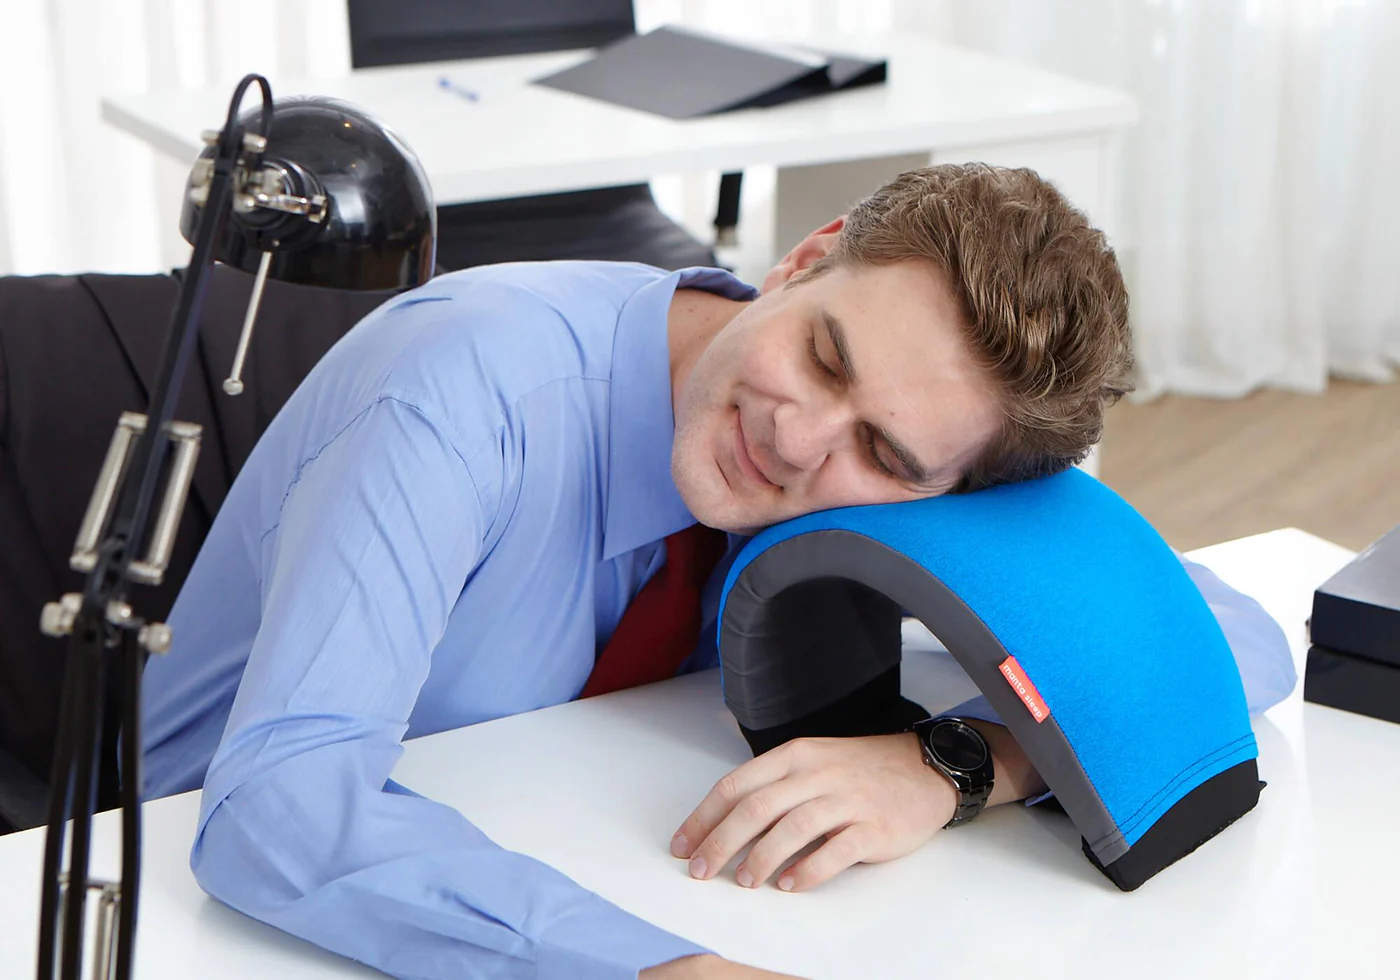 A man taking a coffee nap on his desk, using a blue nap pillow with an arc design.